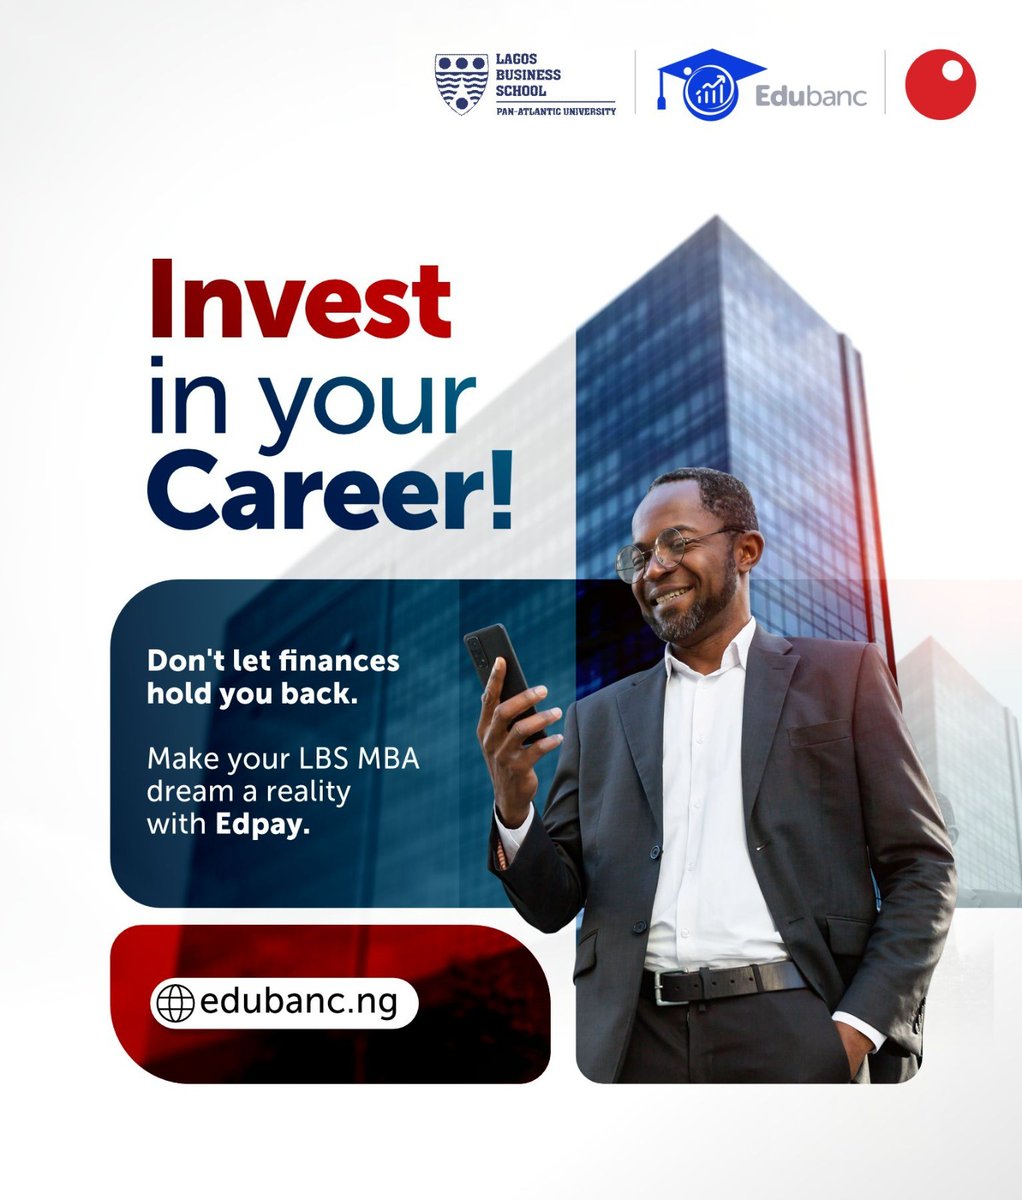 Shape your career today with an LBS MBA funded by Edpay. Apply at edubanc.ng #Sterling #Edpay #Edubanc